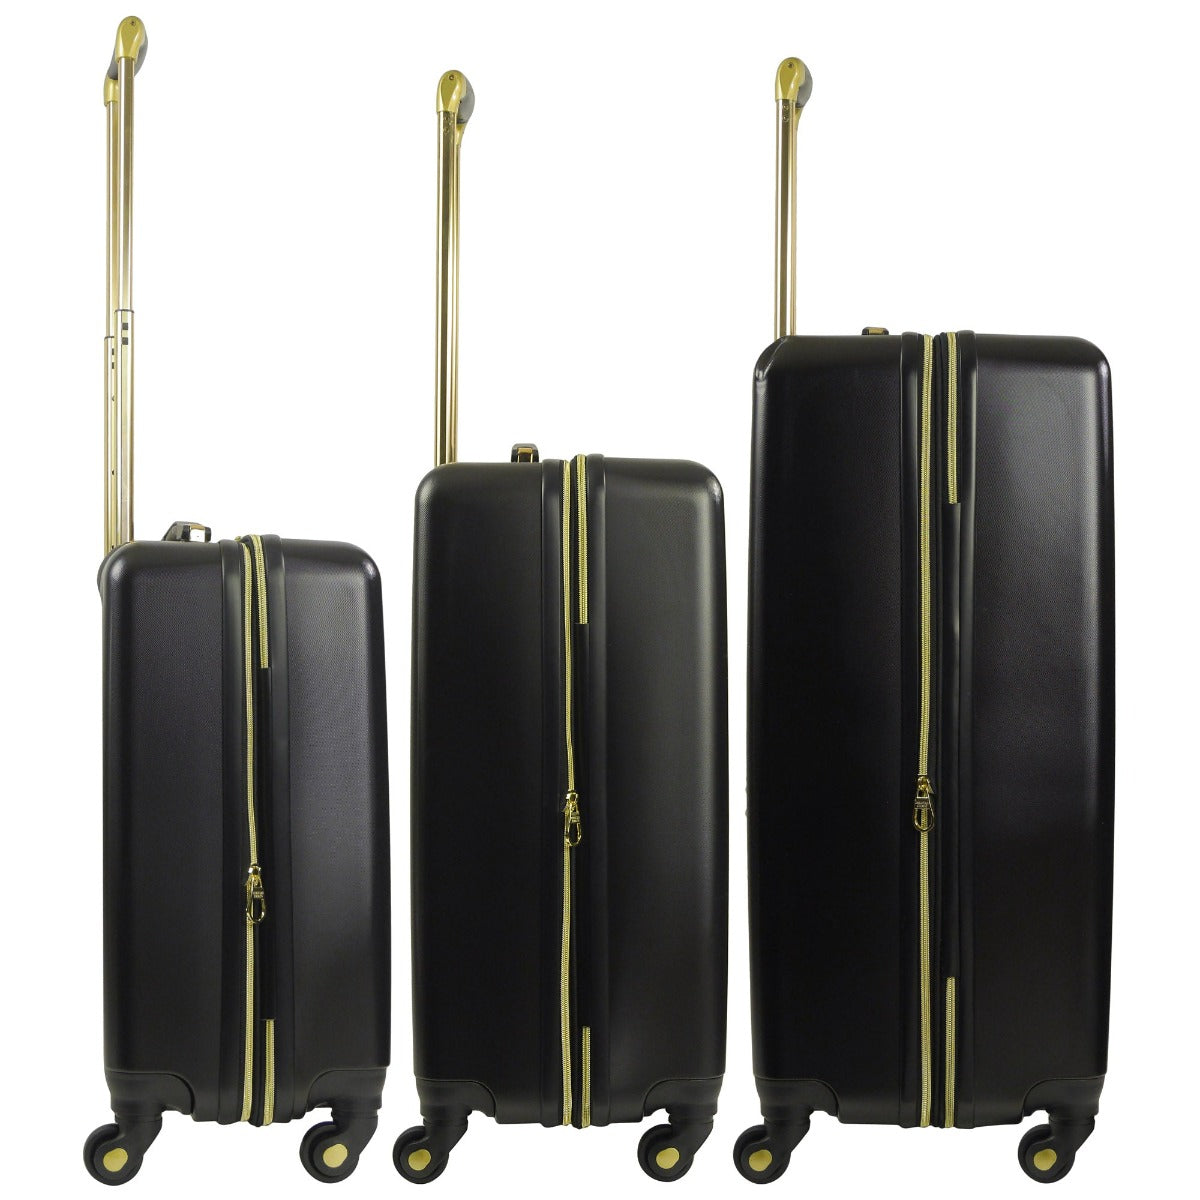 Christian Siriano Addie 3 piece hardside spinner luggage set black - best durable suitcase sets for travel